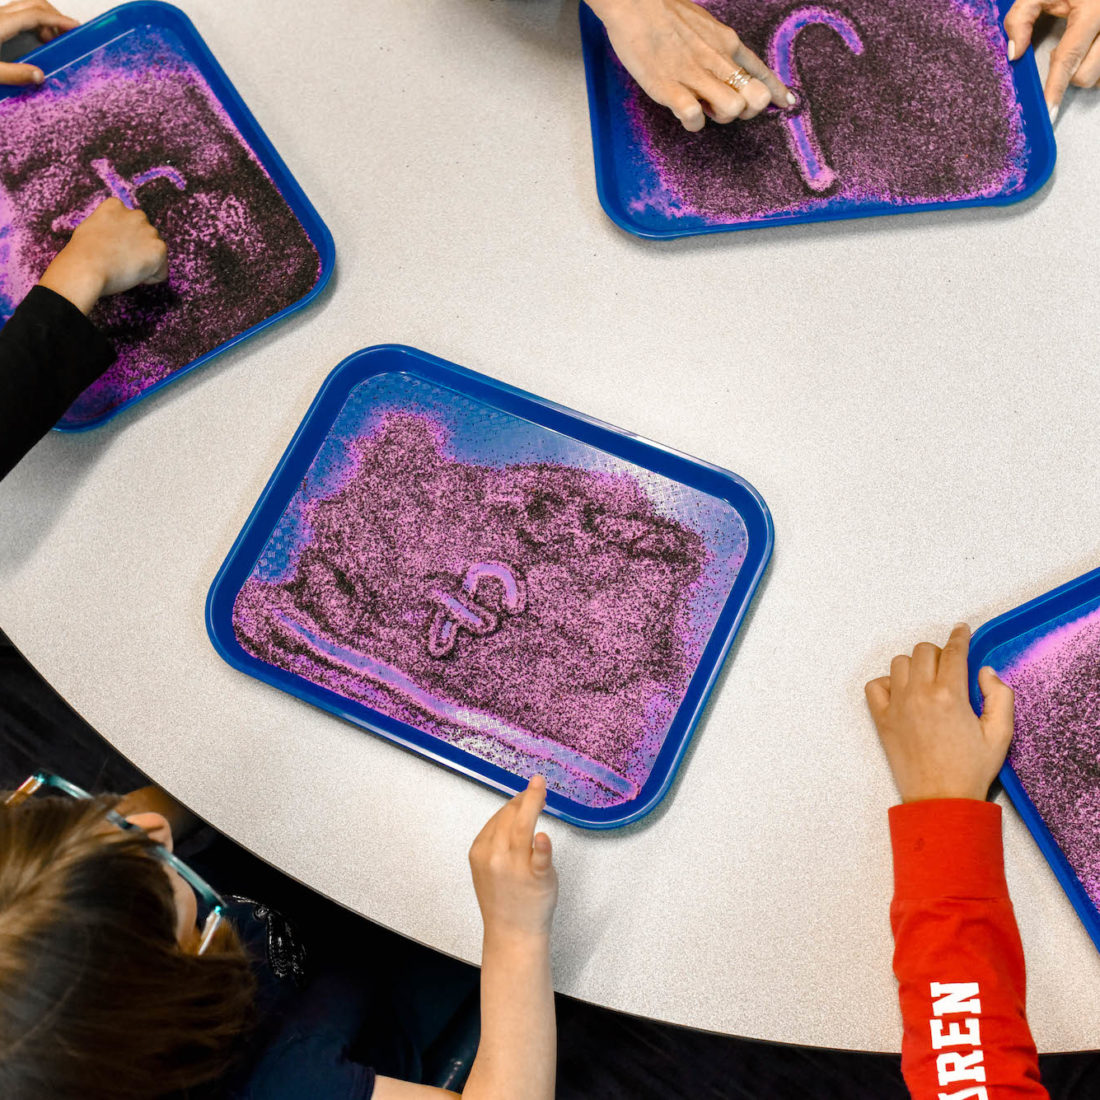 Students using sand in multisensory learning